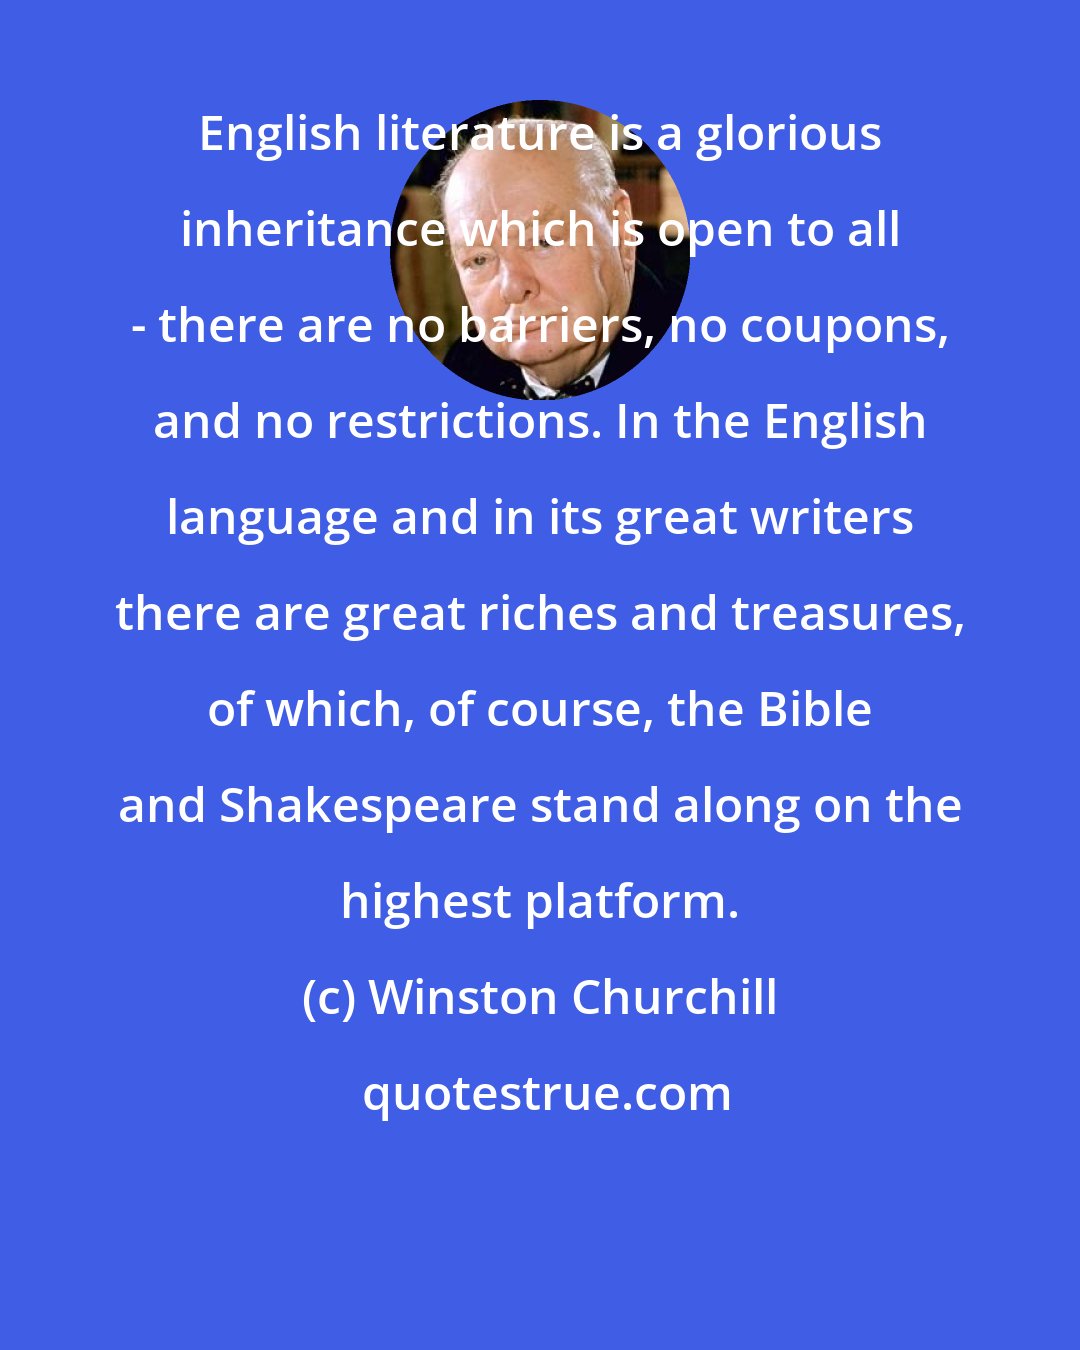 Winston Churchill: English literature is a glorious inheritance which is open to all - there are no barriers, no coupons, and no restrictions. In the English language and in its great writers there are great riches and treasures, of which, of course, the Bible and Shakespeare stand along on the highest platform.